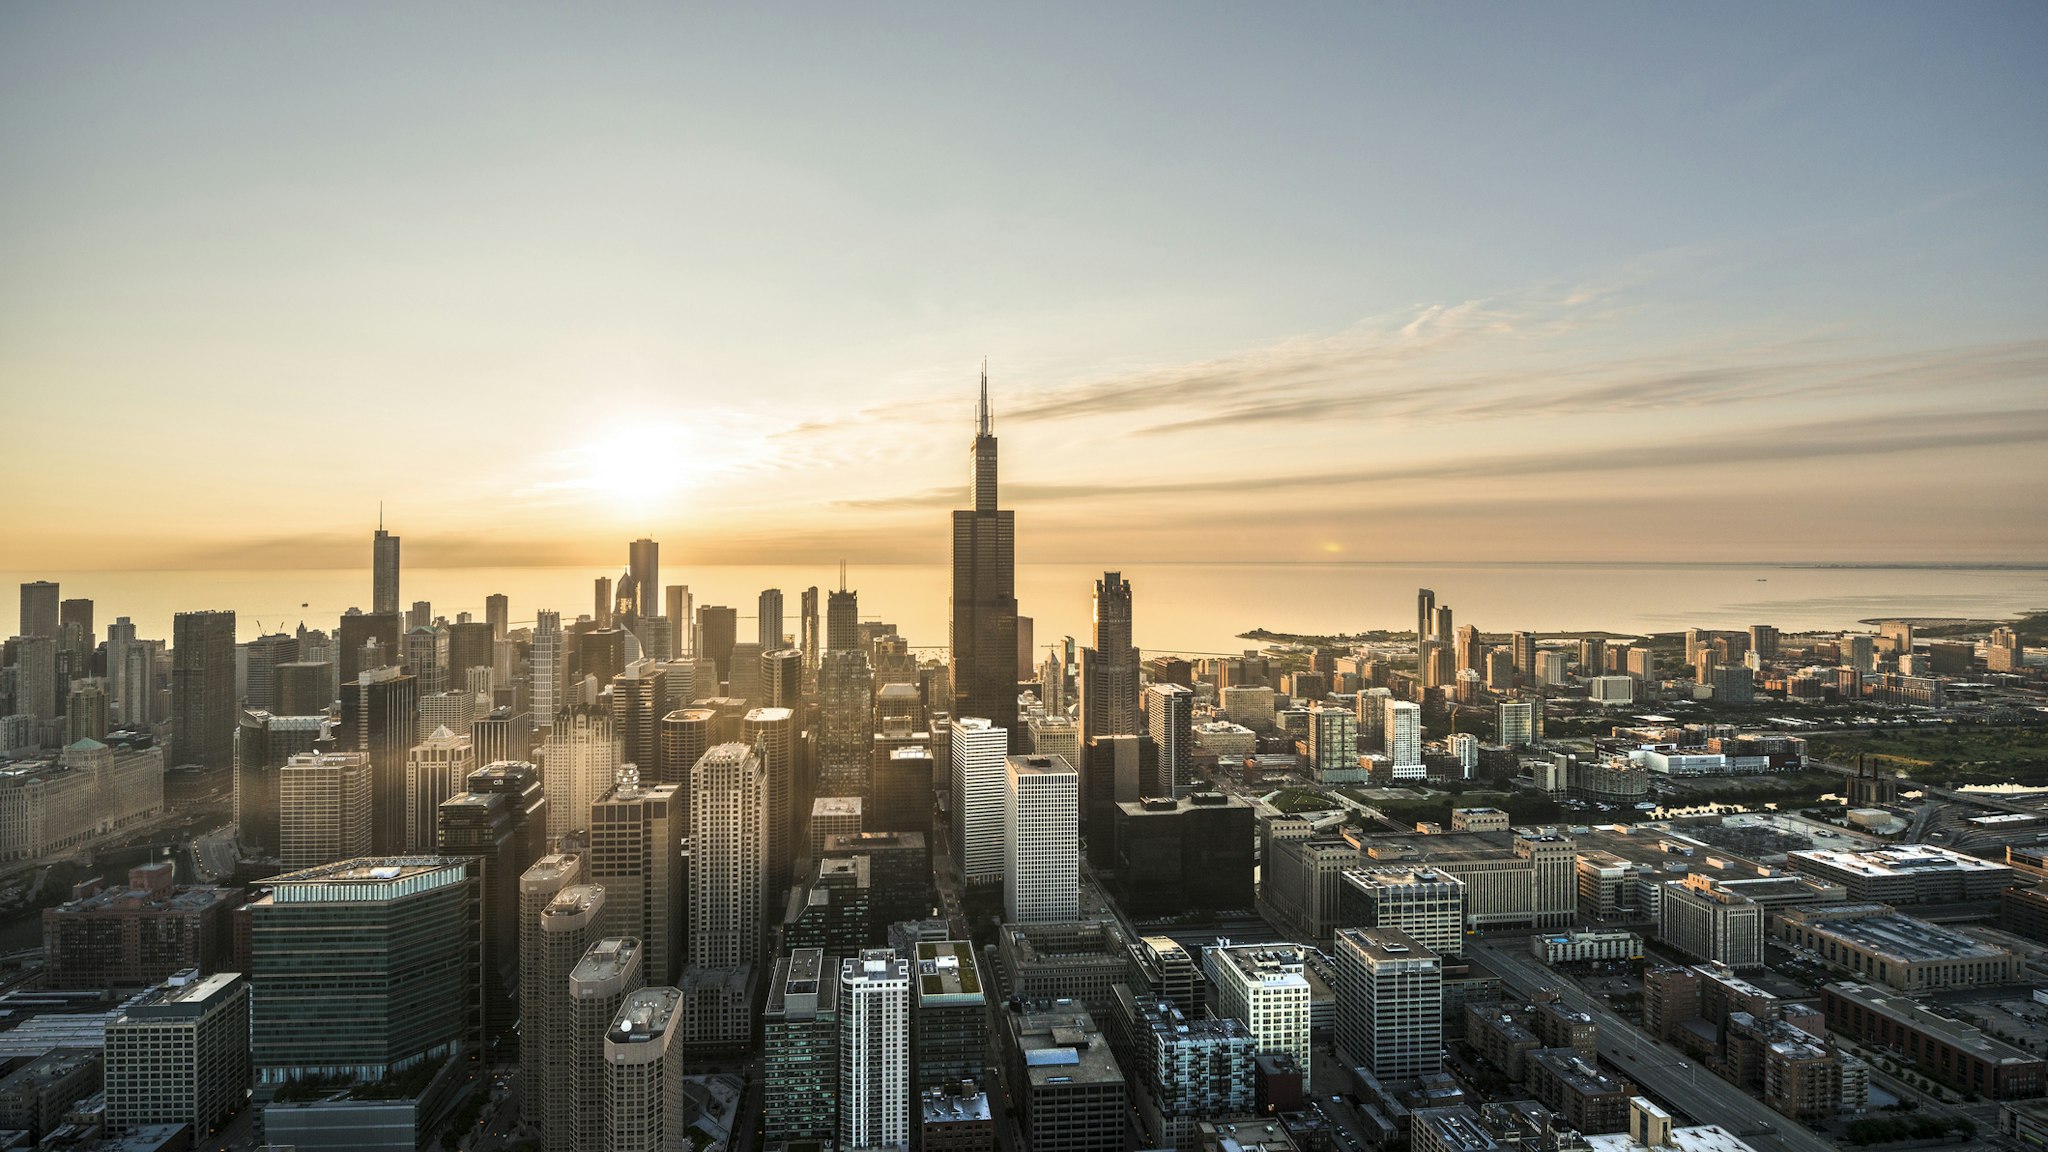 Aerial shot of Chicago waterfront at sunrise - stock photo